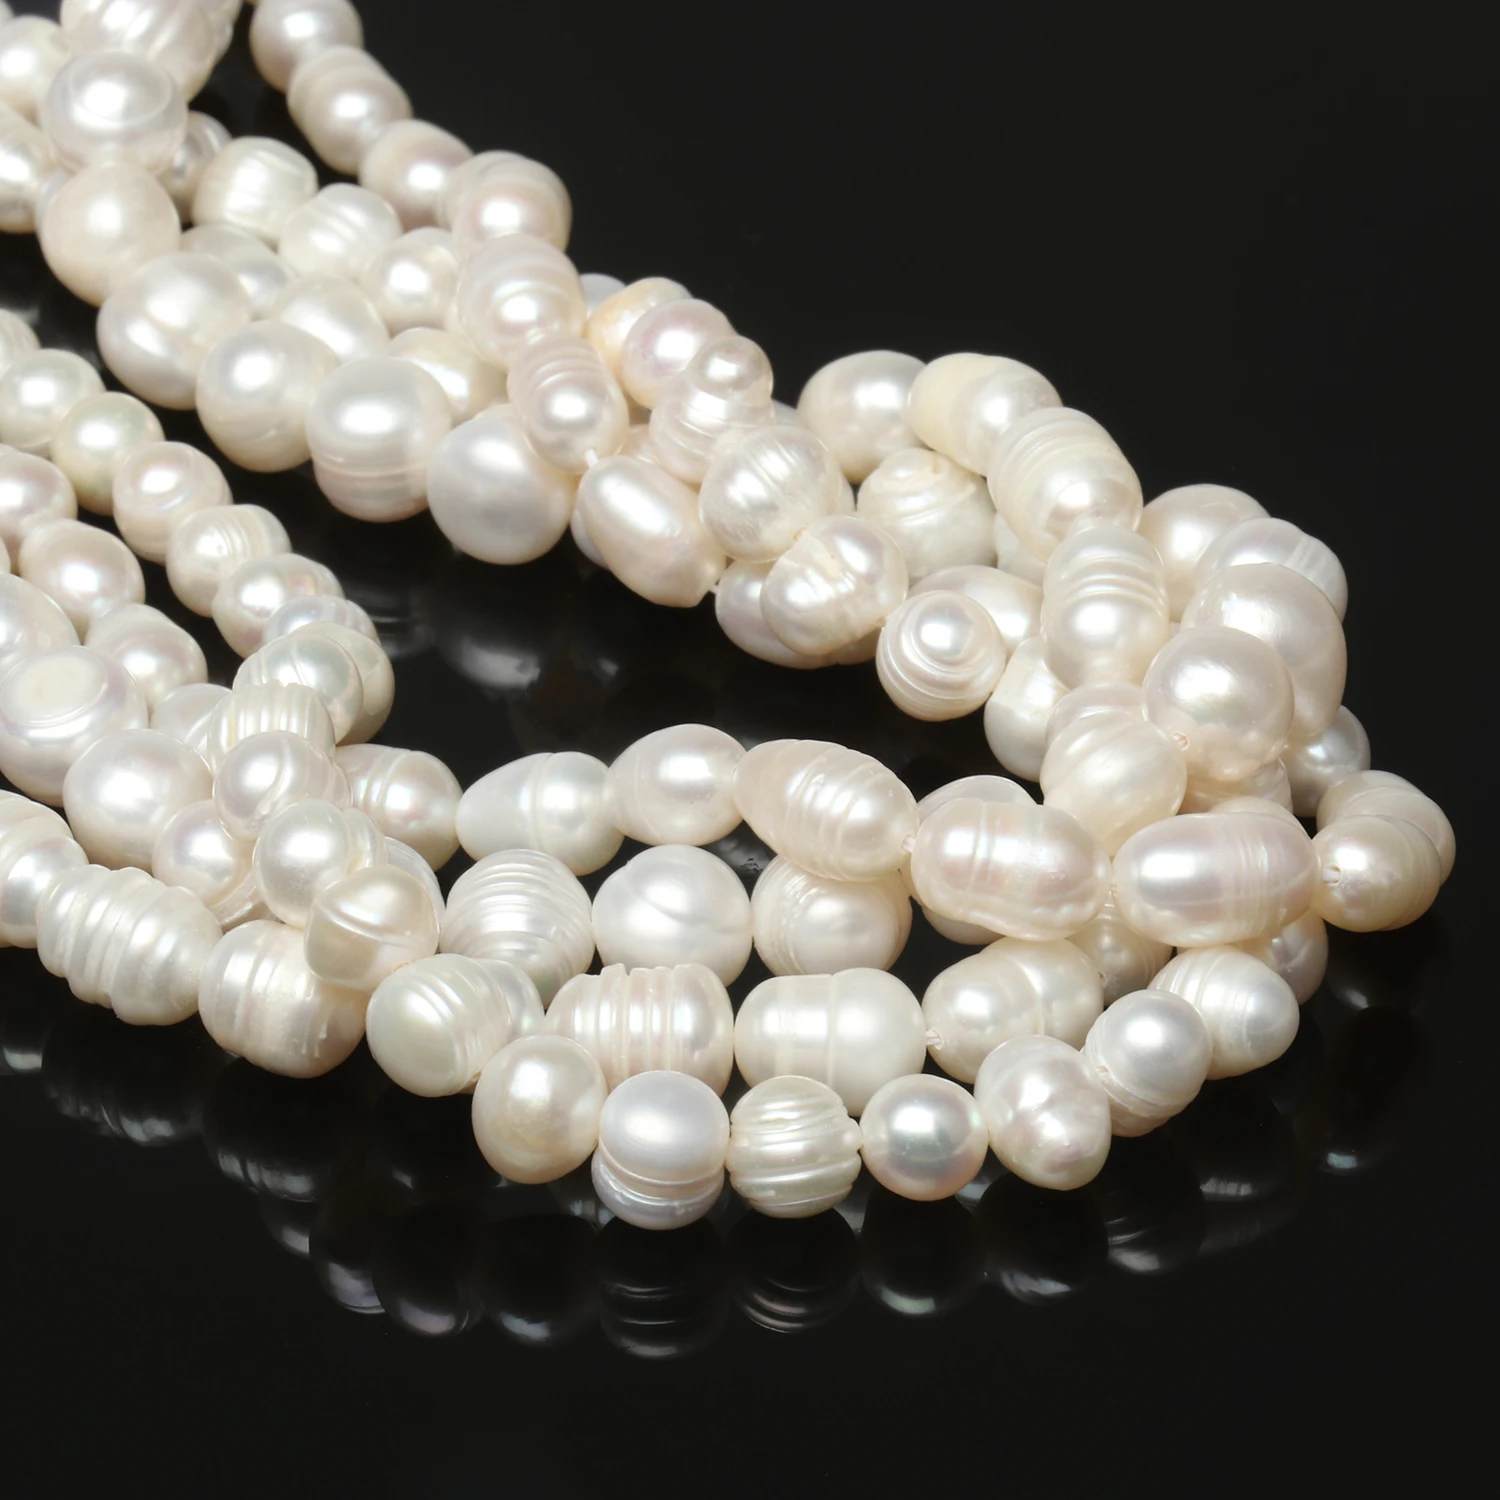 1 Str,Real Freshwater Pearls, Irregular Pearls,AAA, Three-Color Pearl  Necklace, DIY Pearl Accessories, Multi-Size Pearls, Length 35 cm